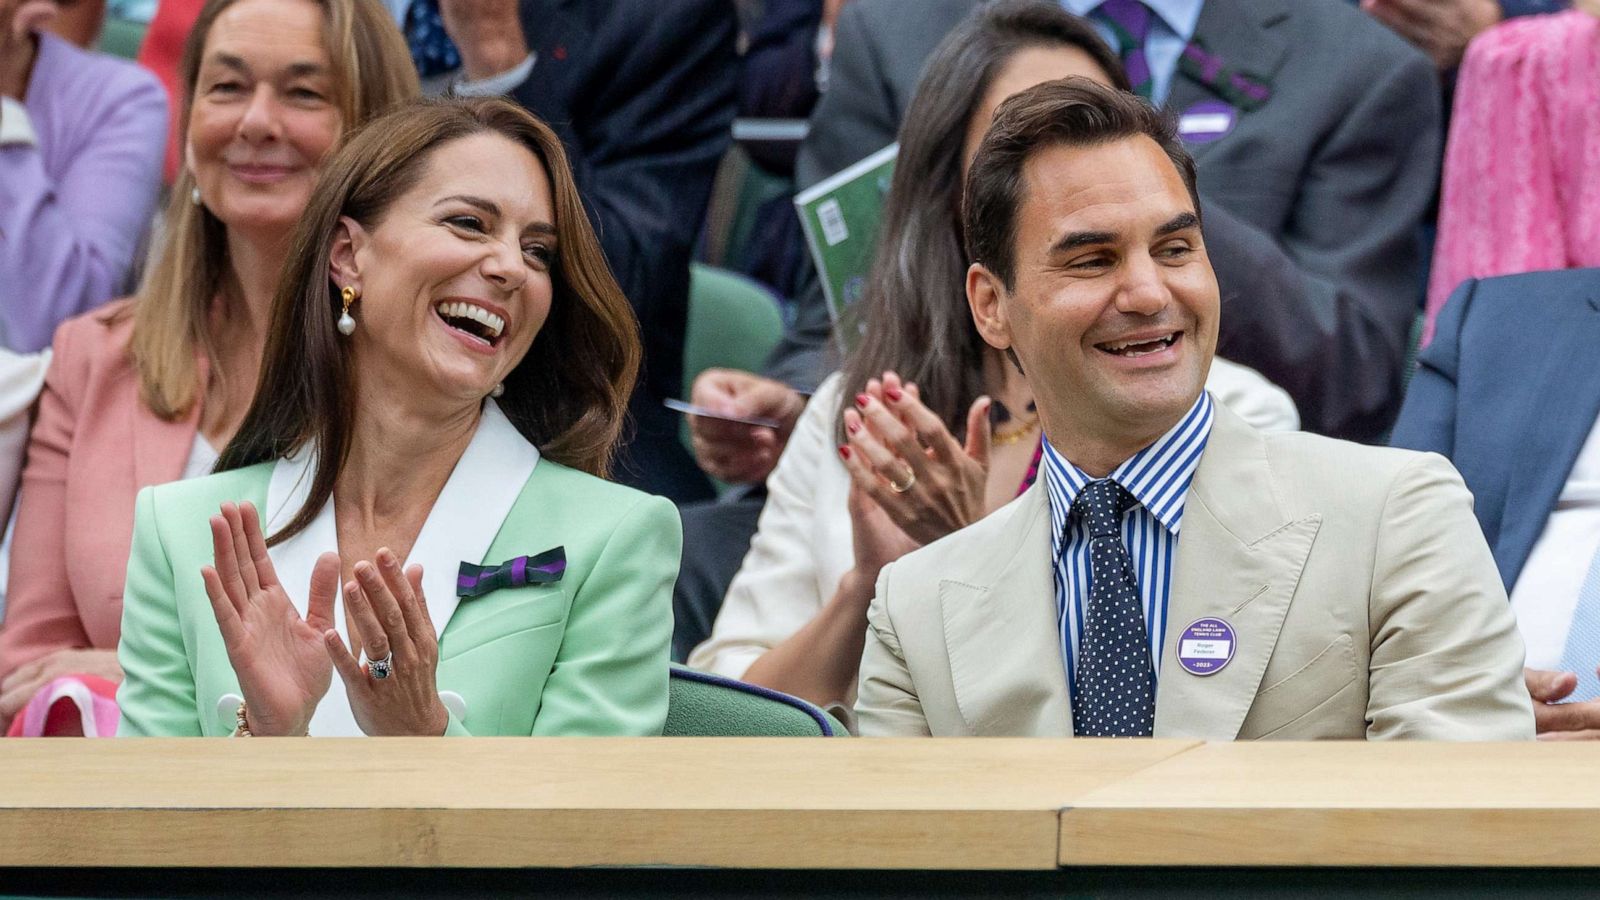 See Rare Look at Wimbledon Royal Box Tickets from George Russell